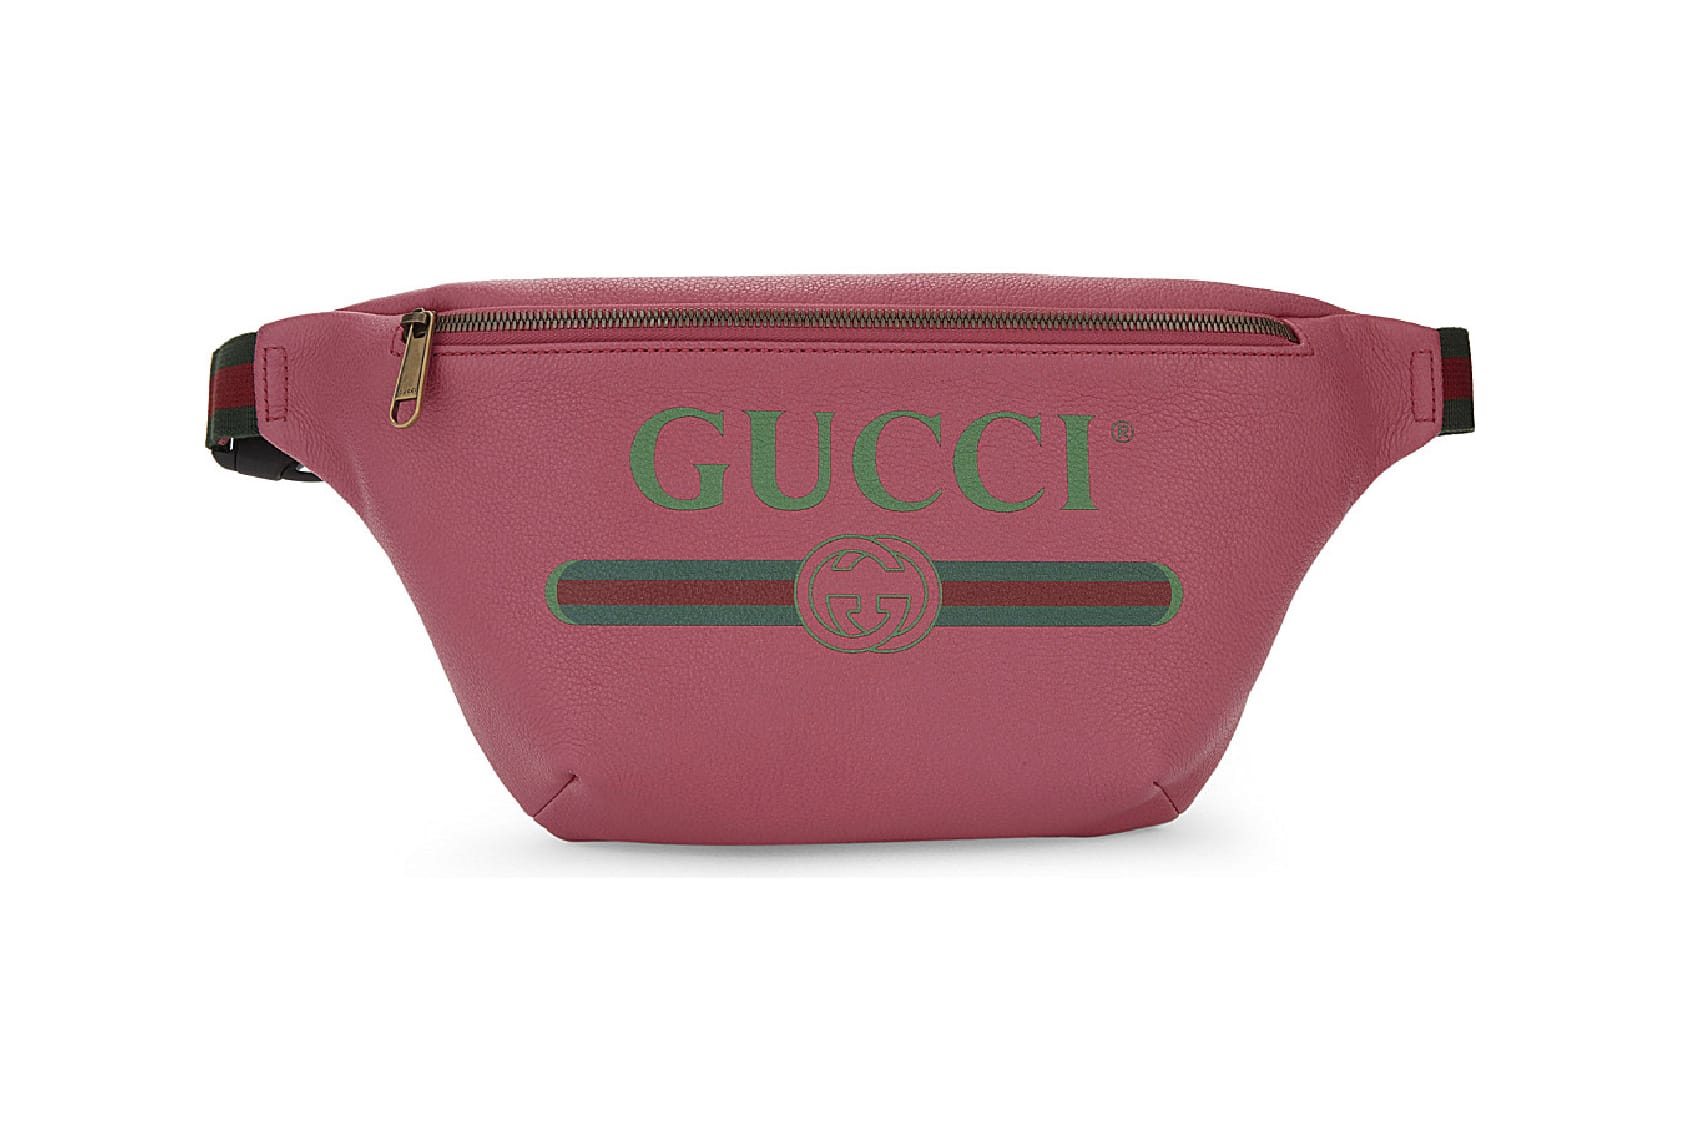 gucci hot pink fanny pack